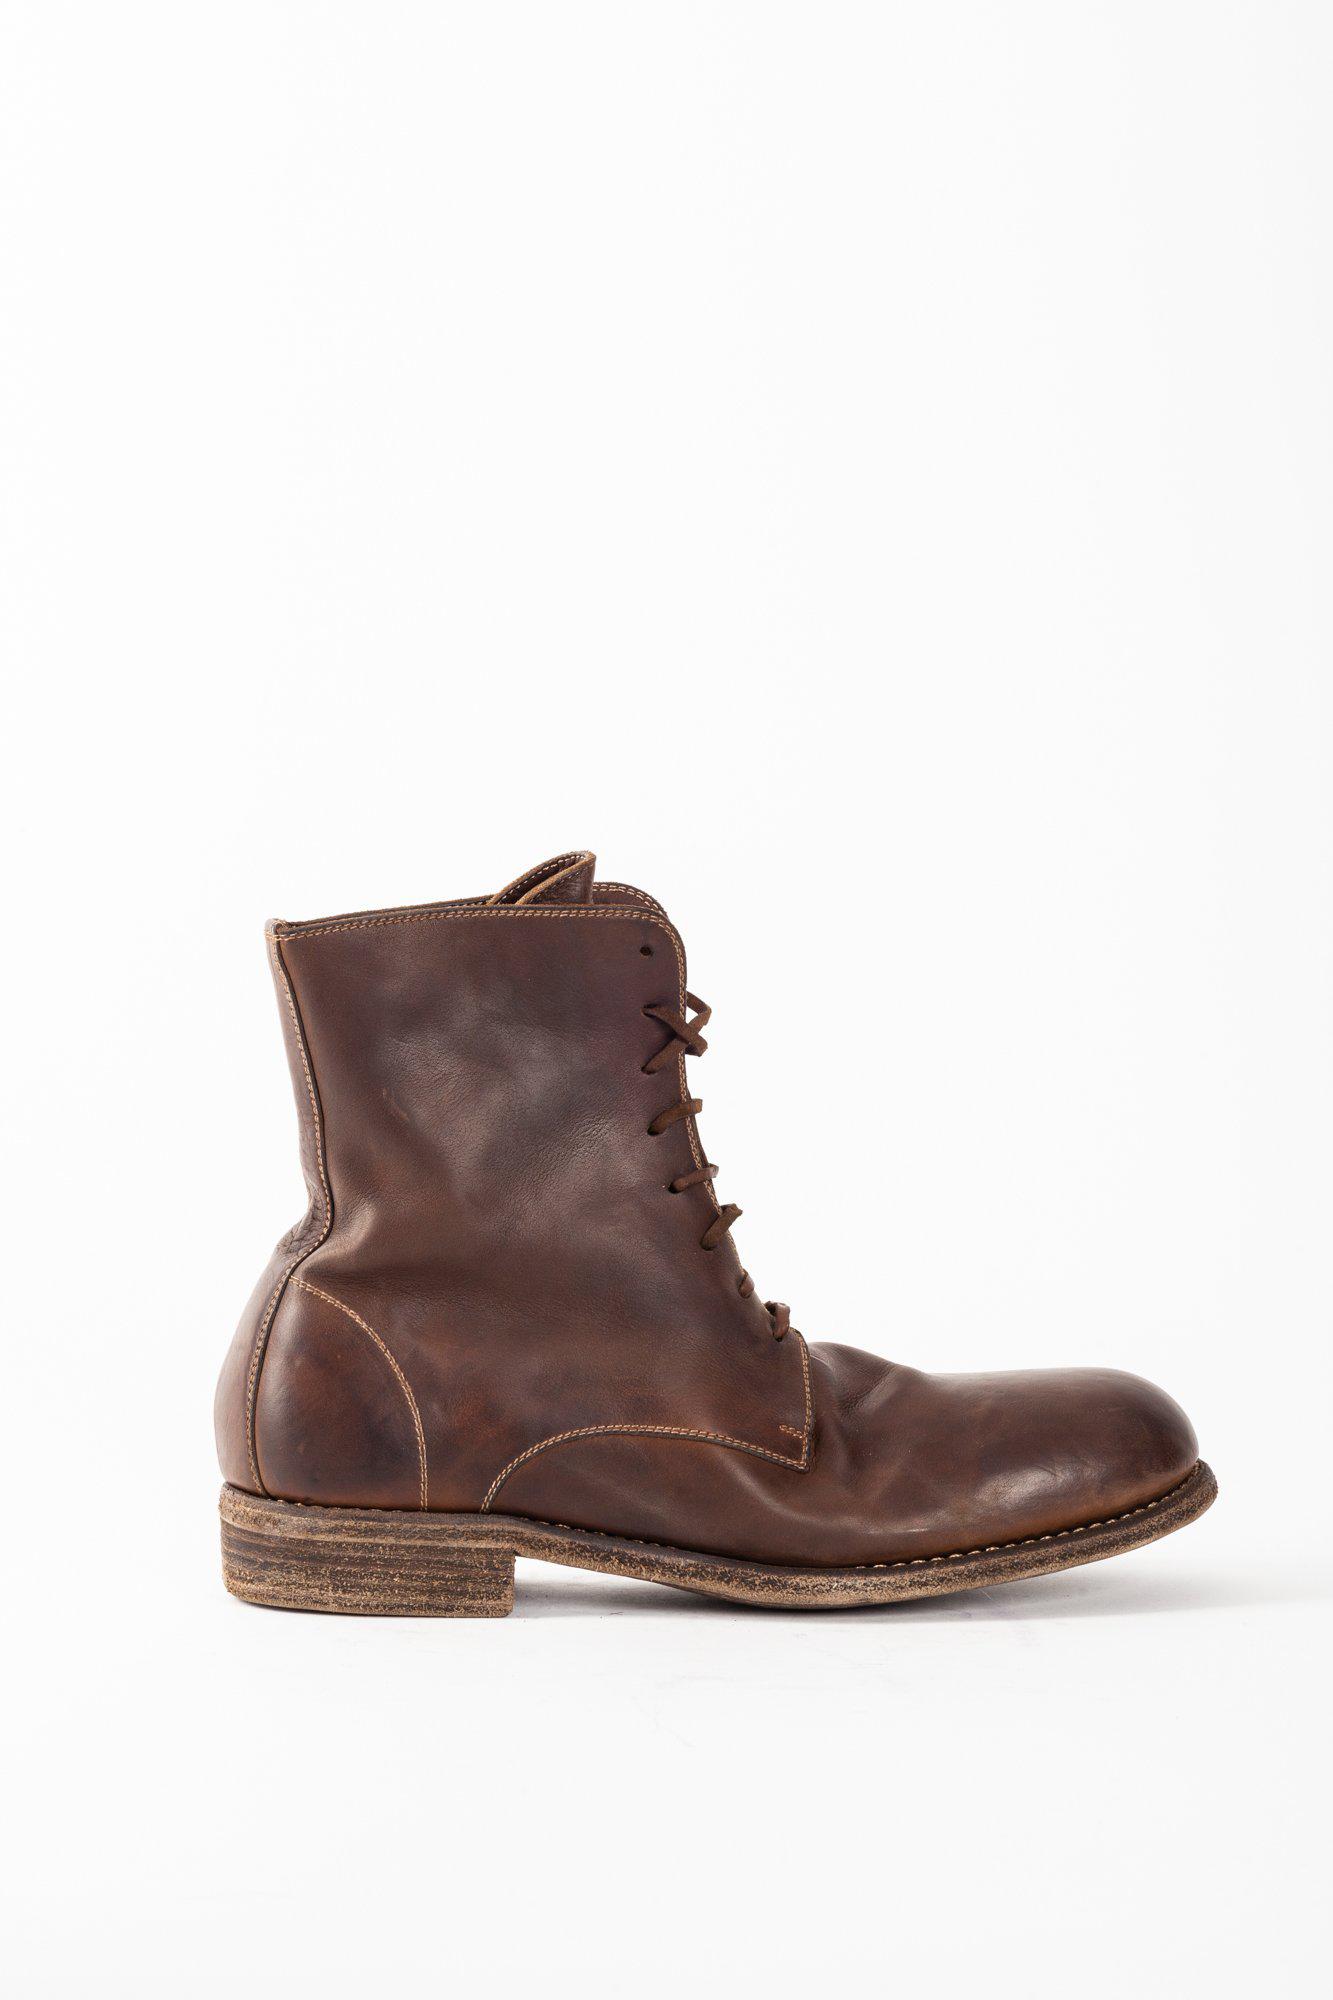 Guidi Leather 995 Calf Full Grain Boots in Brown for Men - Lyst